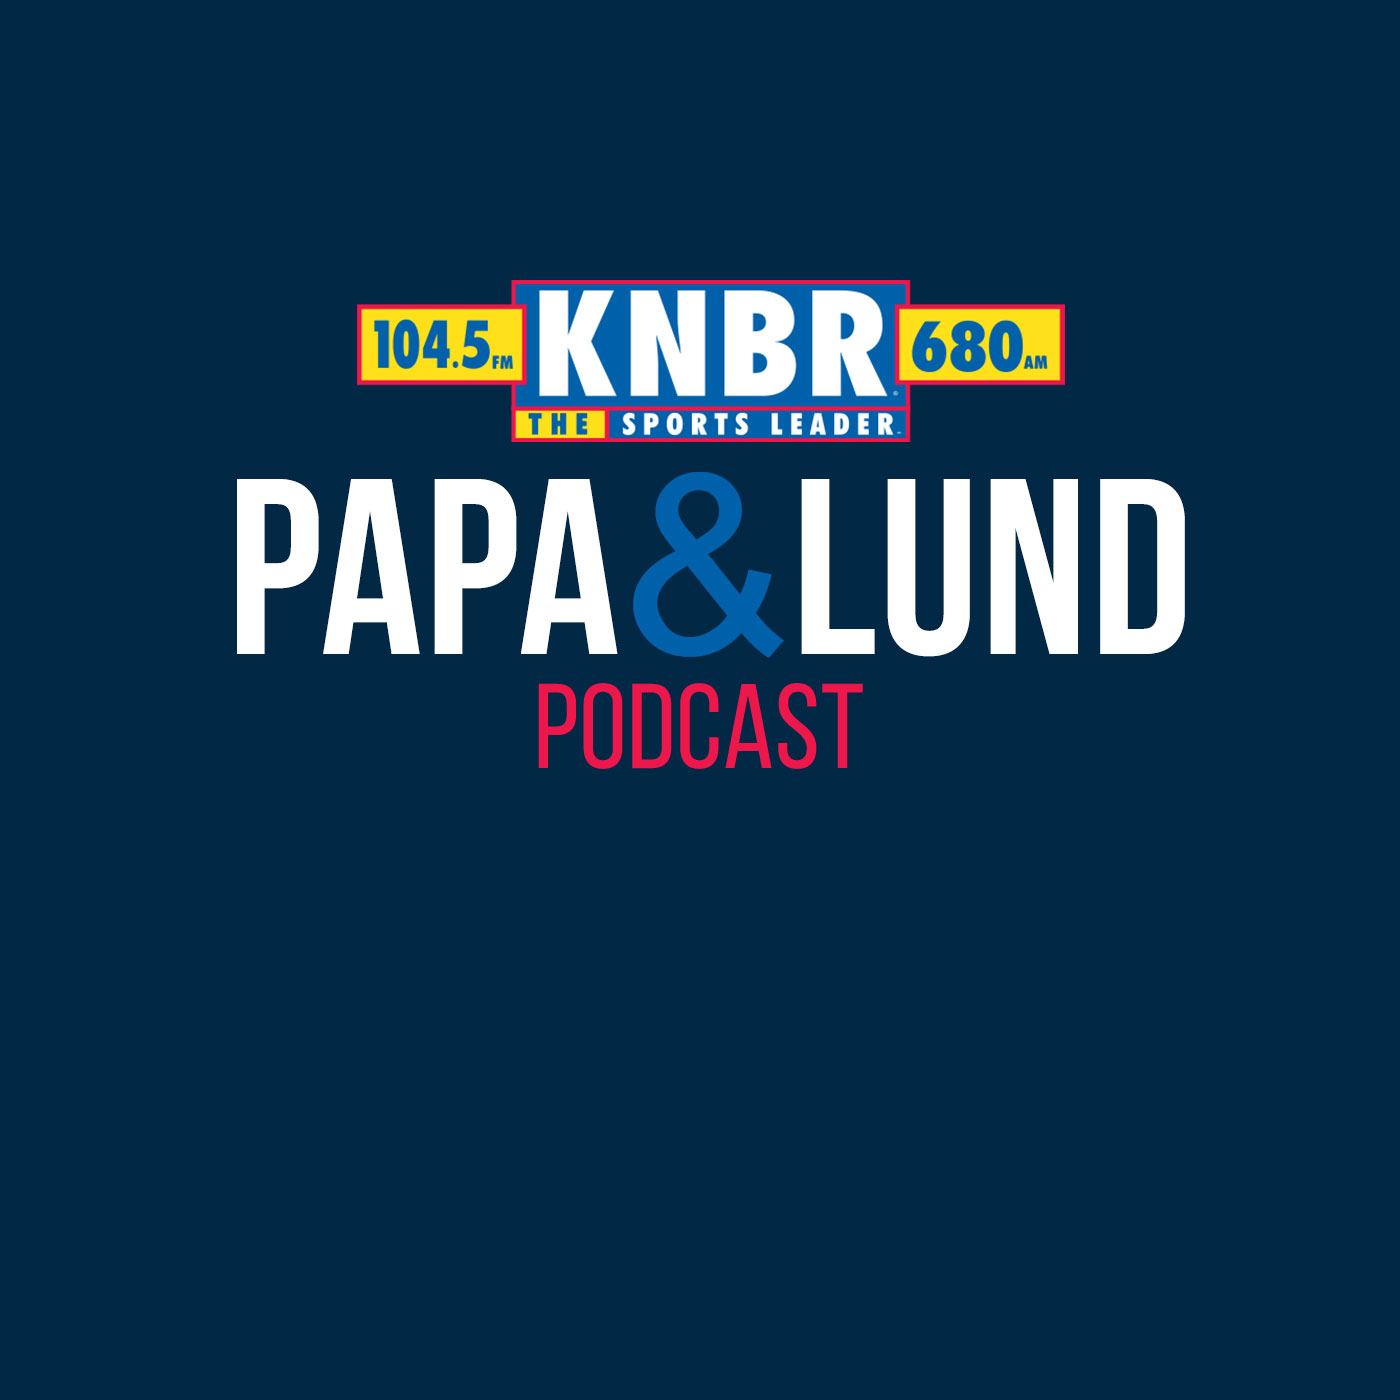 6-17 Howard Beck joins Papa & Lund to discribe the atmosphere in Boston and how the Warriors were able to overcome one of the loudest fan bases in the NBA